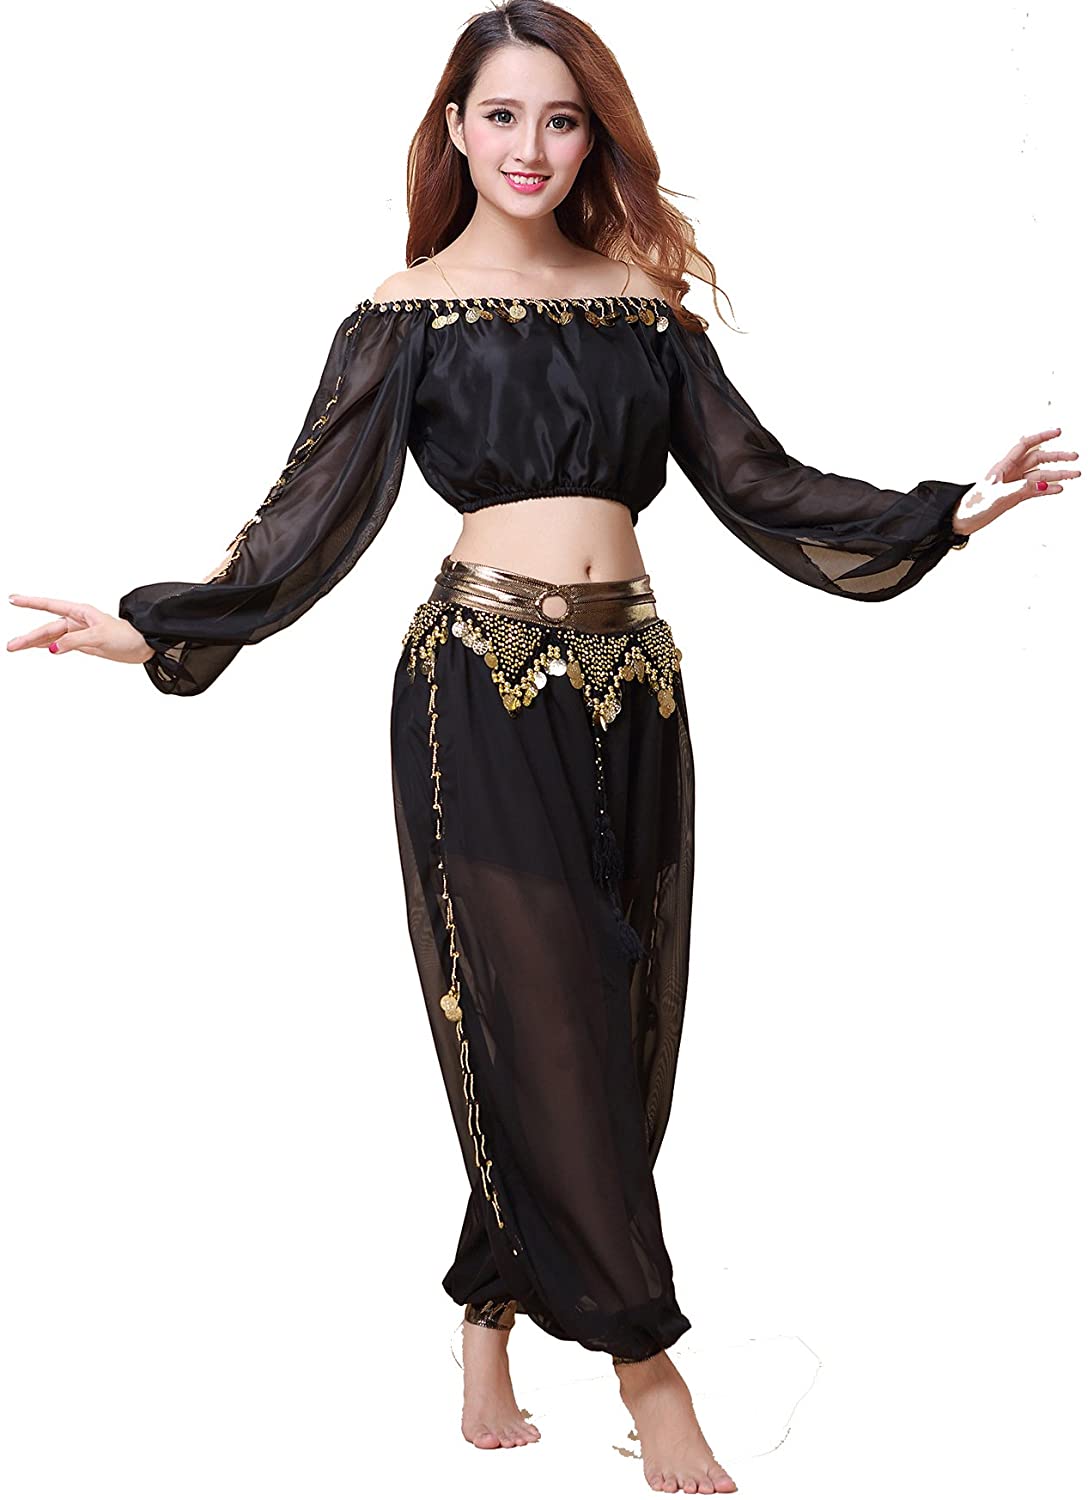 ZLTdream Belly Dance Chiffon Long Sleeves Top and Lantern Coins Pants Black, One Size | Decor Gifts and More